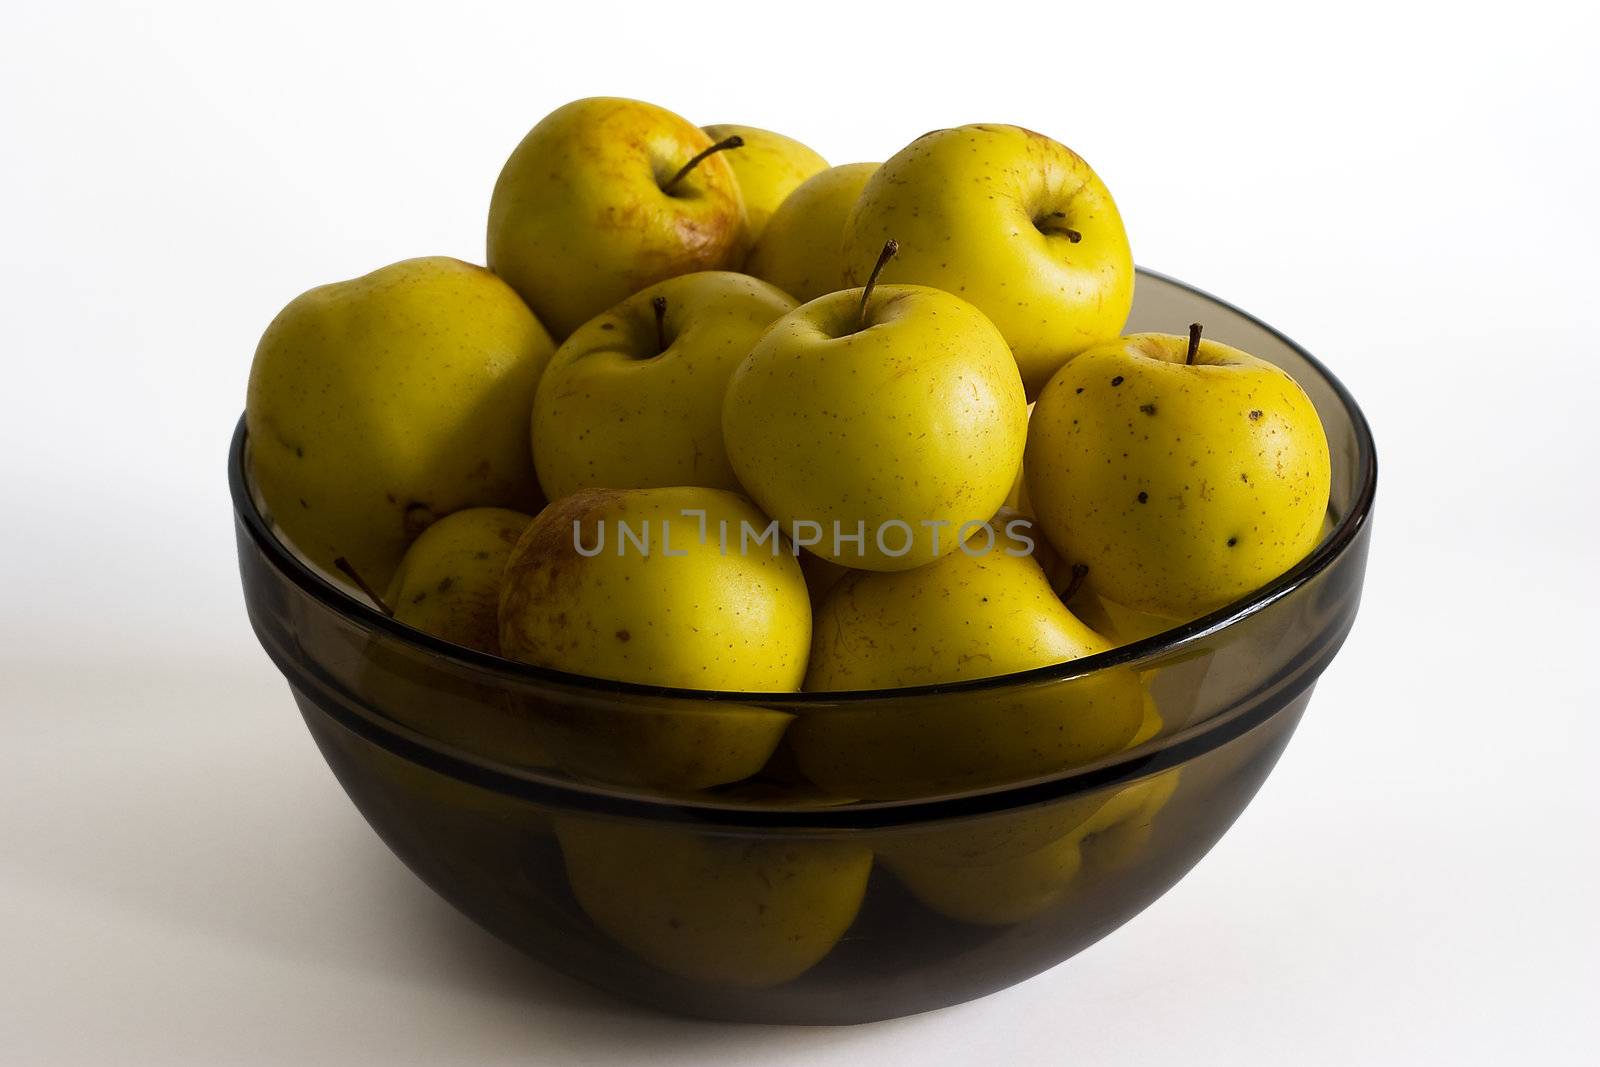 Yellow apples in glass bowl by ints